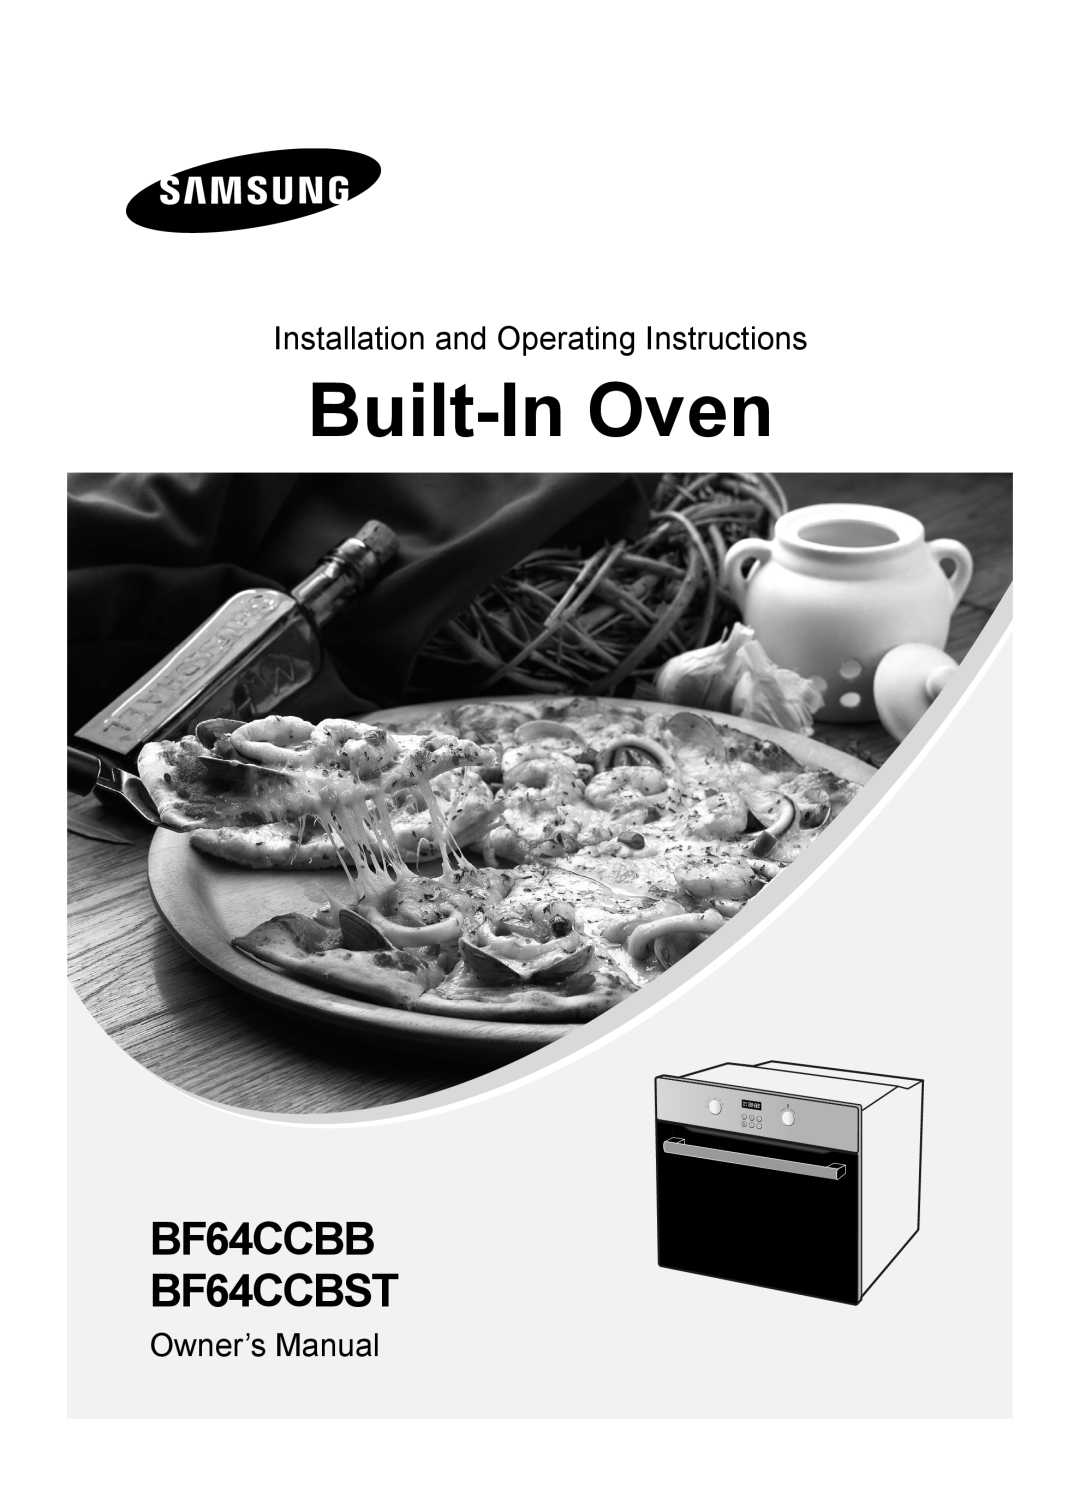 Samsung owner manual Built-In Oven, BF64CCBB BF64CCBST, Installation and Operating Instructions, Owner’s Manual 